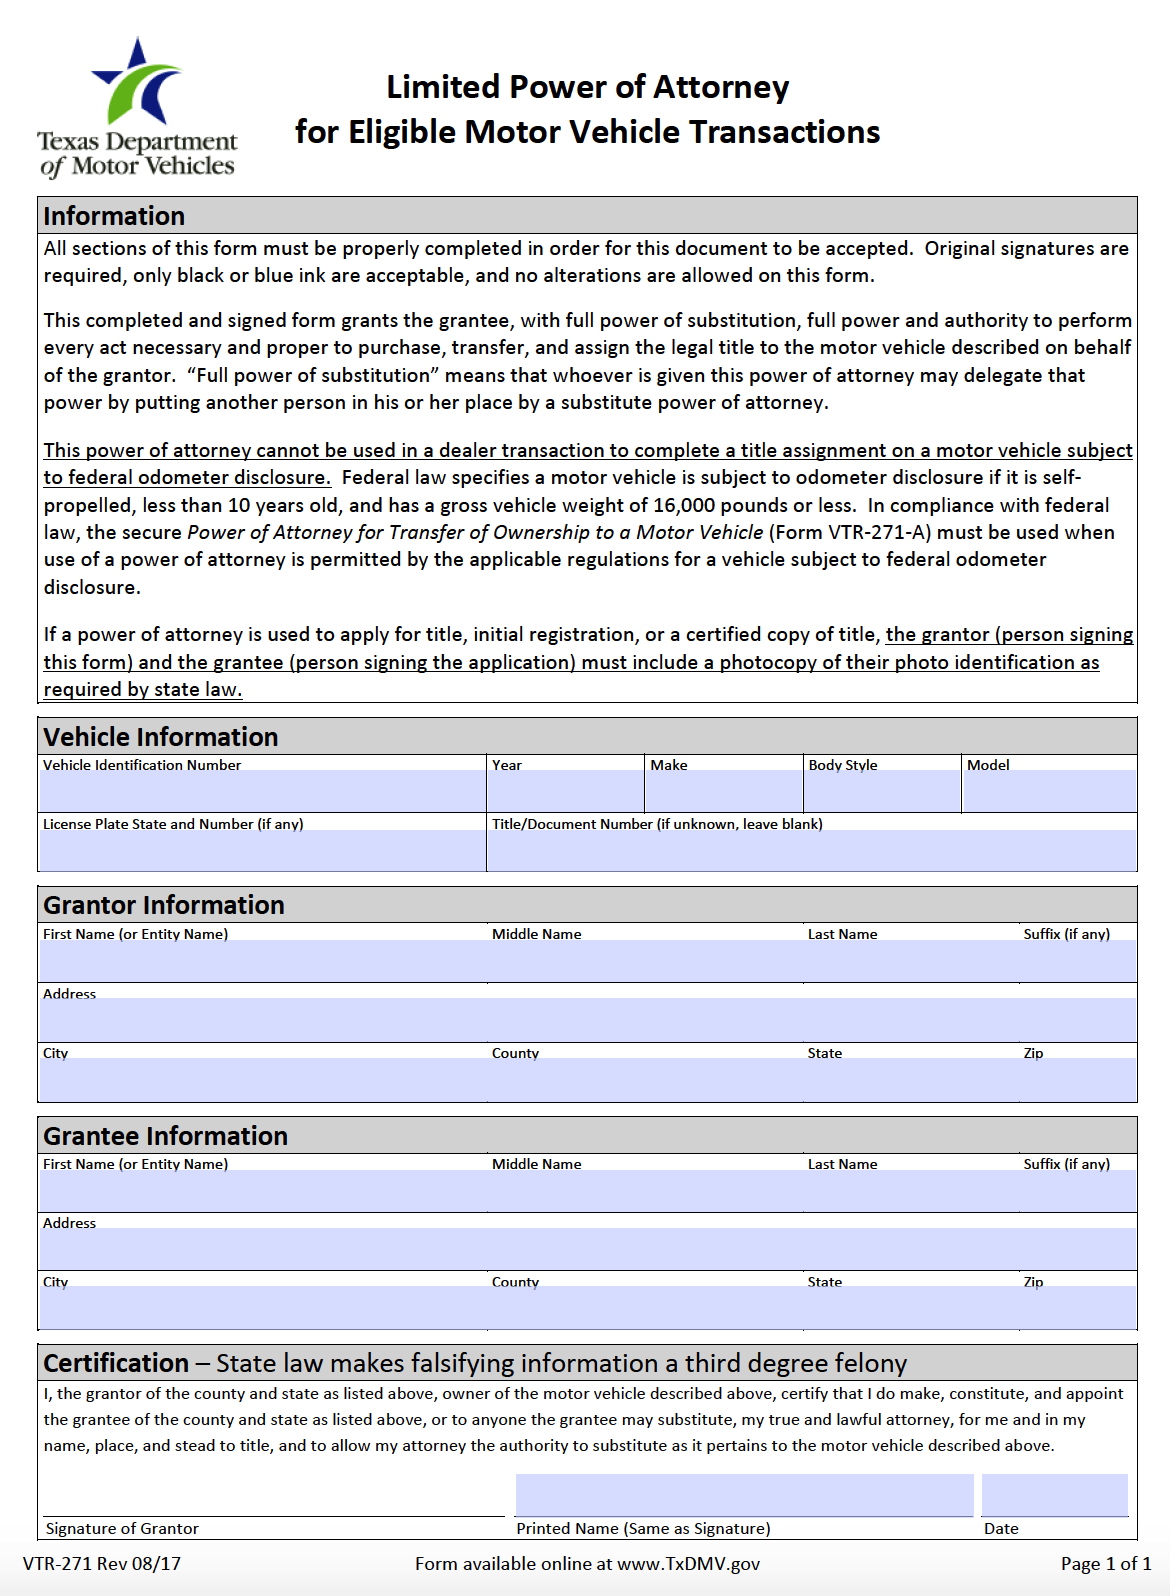 Limited Power Of Attorney Vehicle Printable Form Printable Forms Free